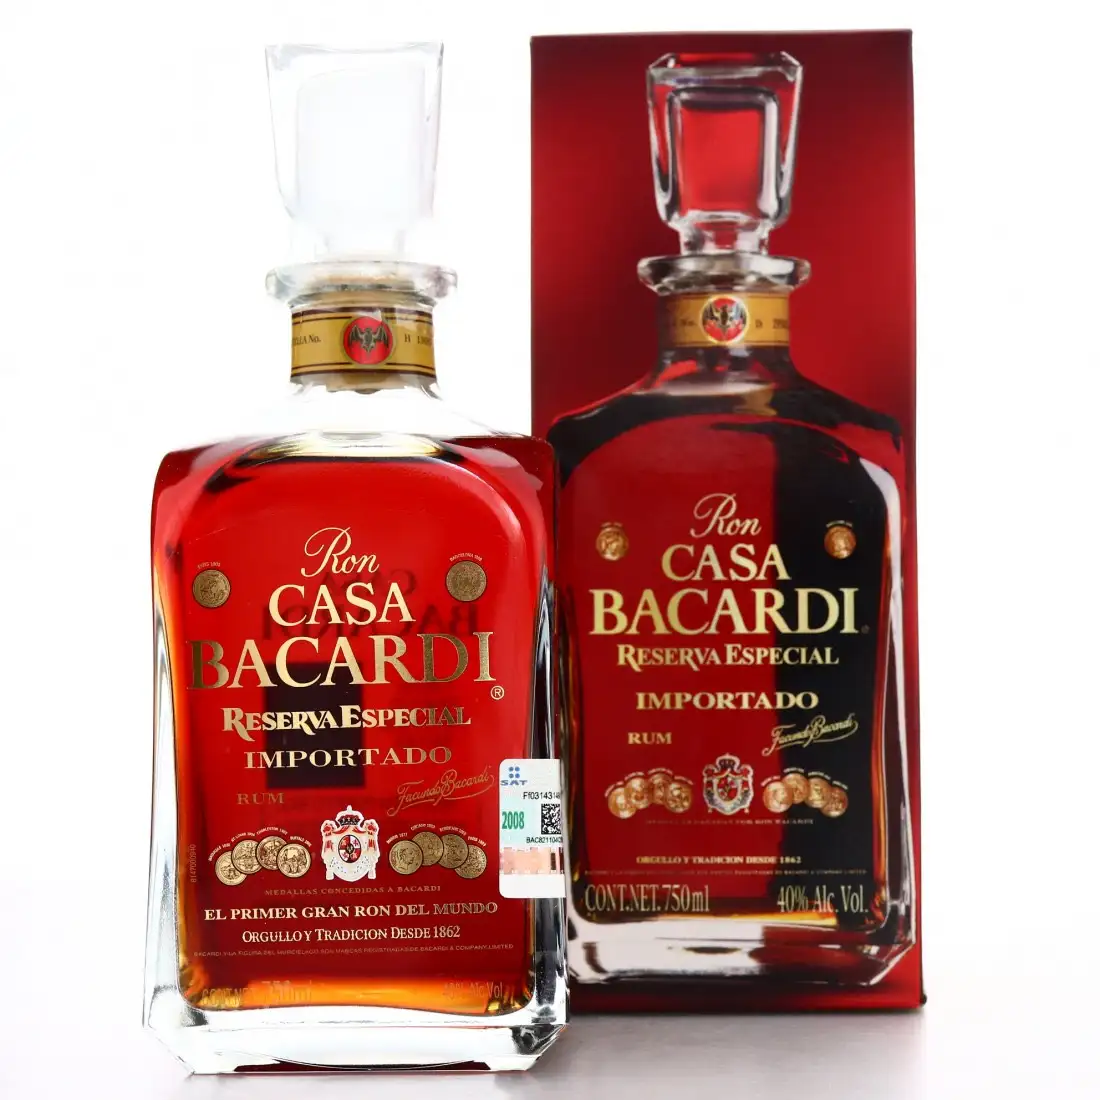 Image of the front of the bottle of the rum Casa Bacardi Reserva Especial Importado